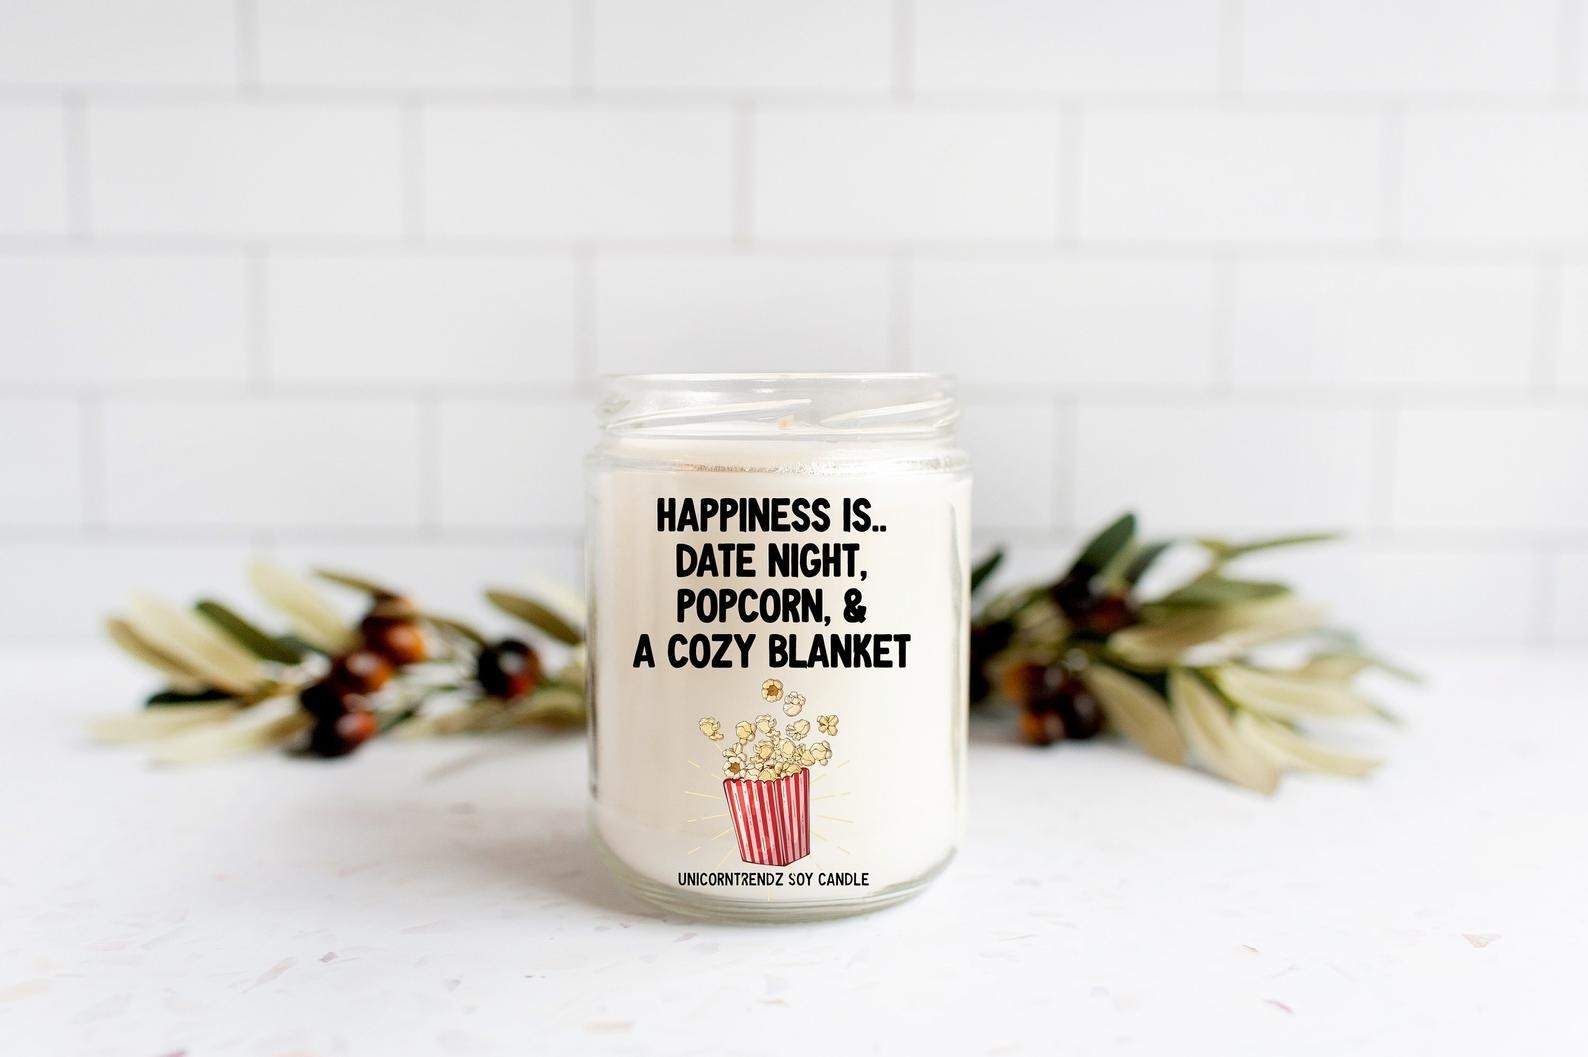 the candle that says happiness is date night, popcorn, and a cozy blanket